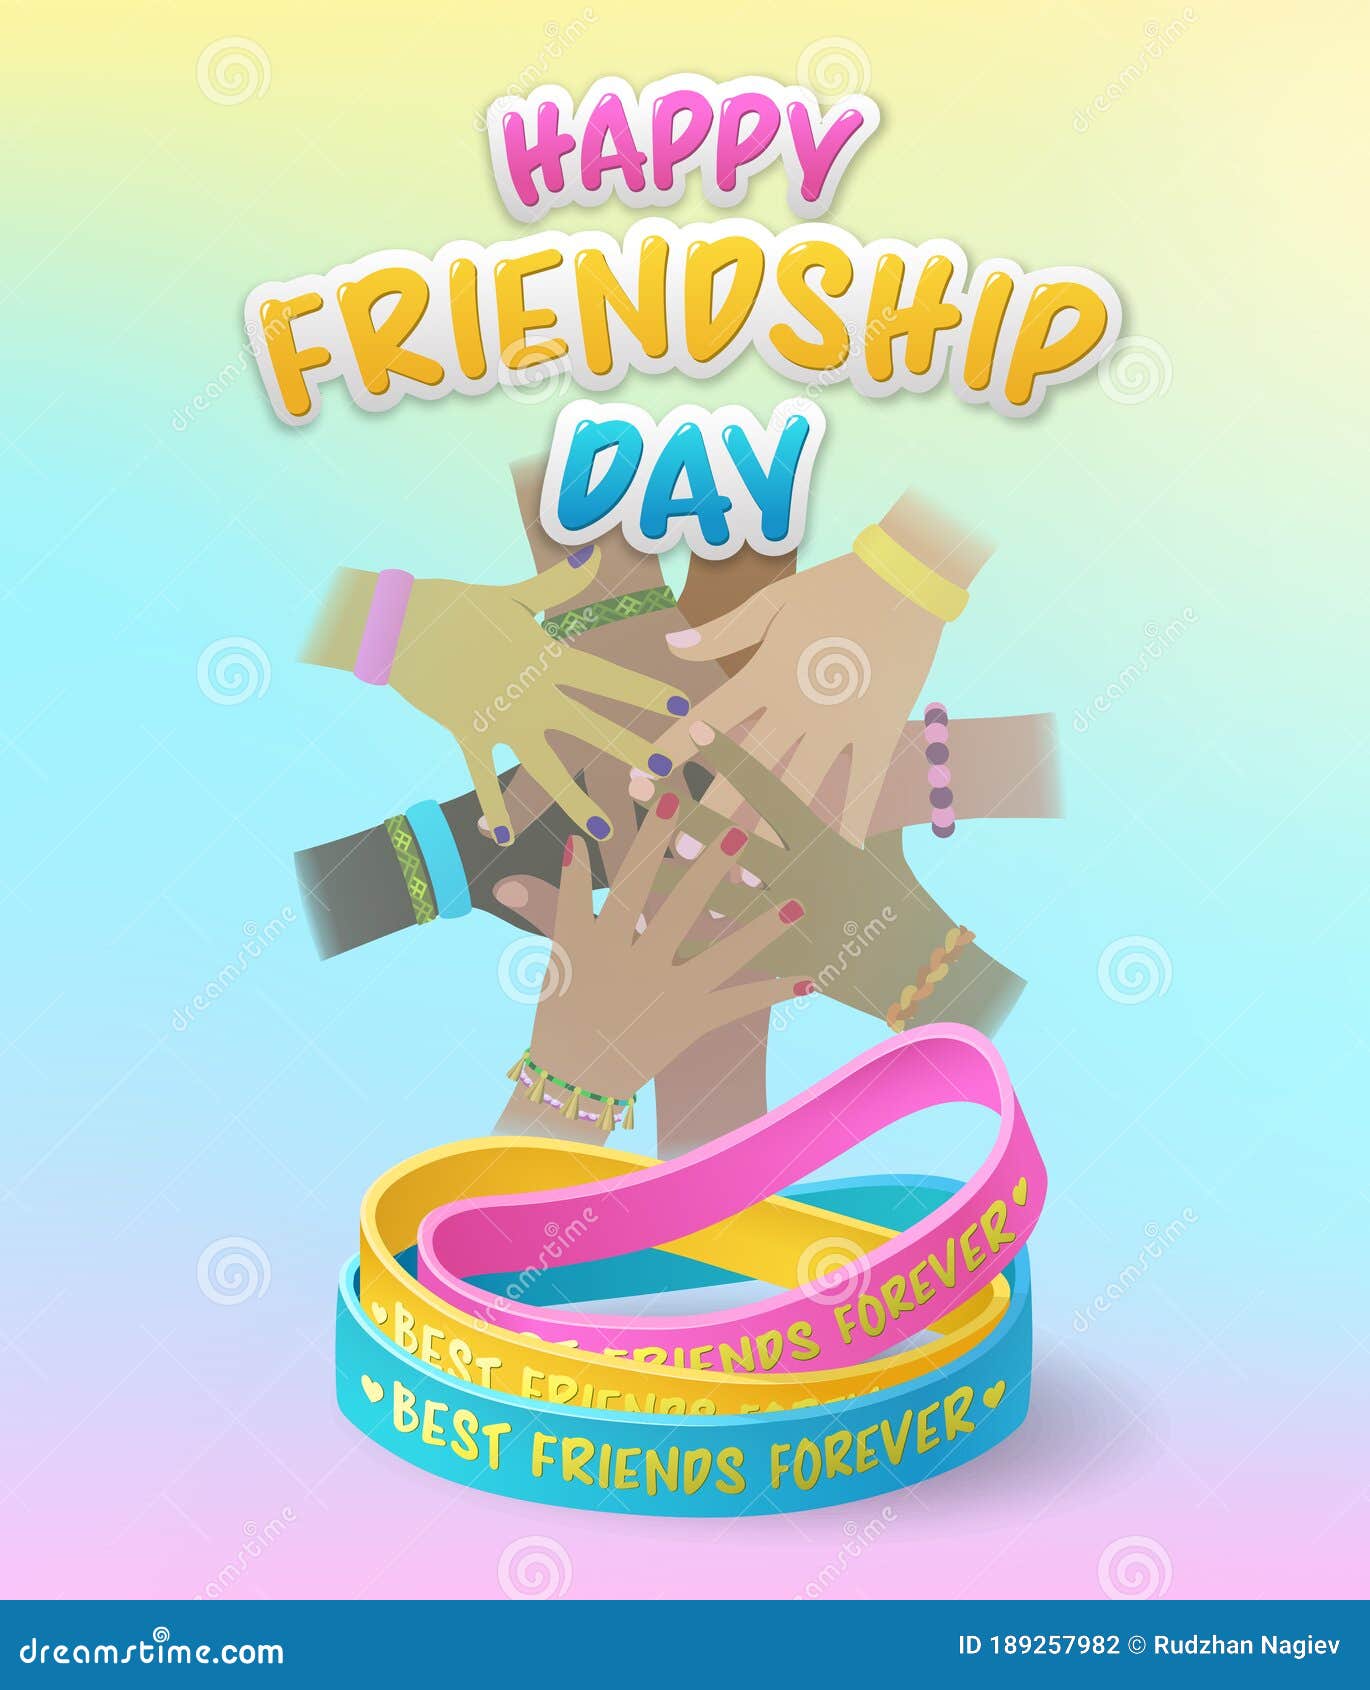 Hand With Love Tattoo And Colorful Friendship Bracelets Stock Clipart, Royalty-Free